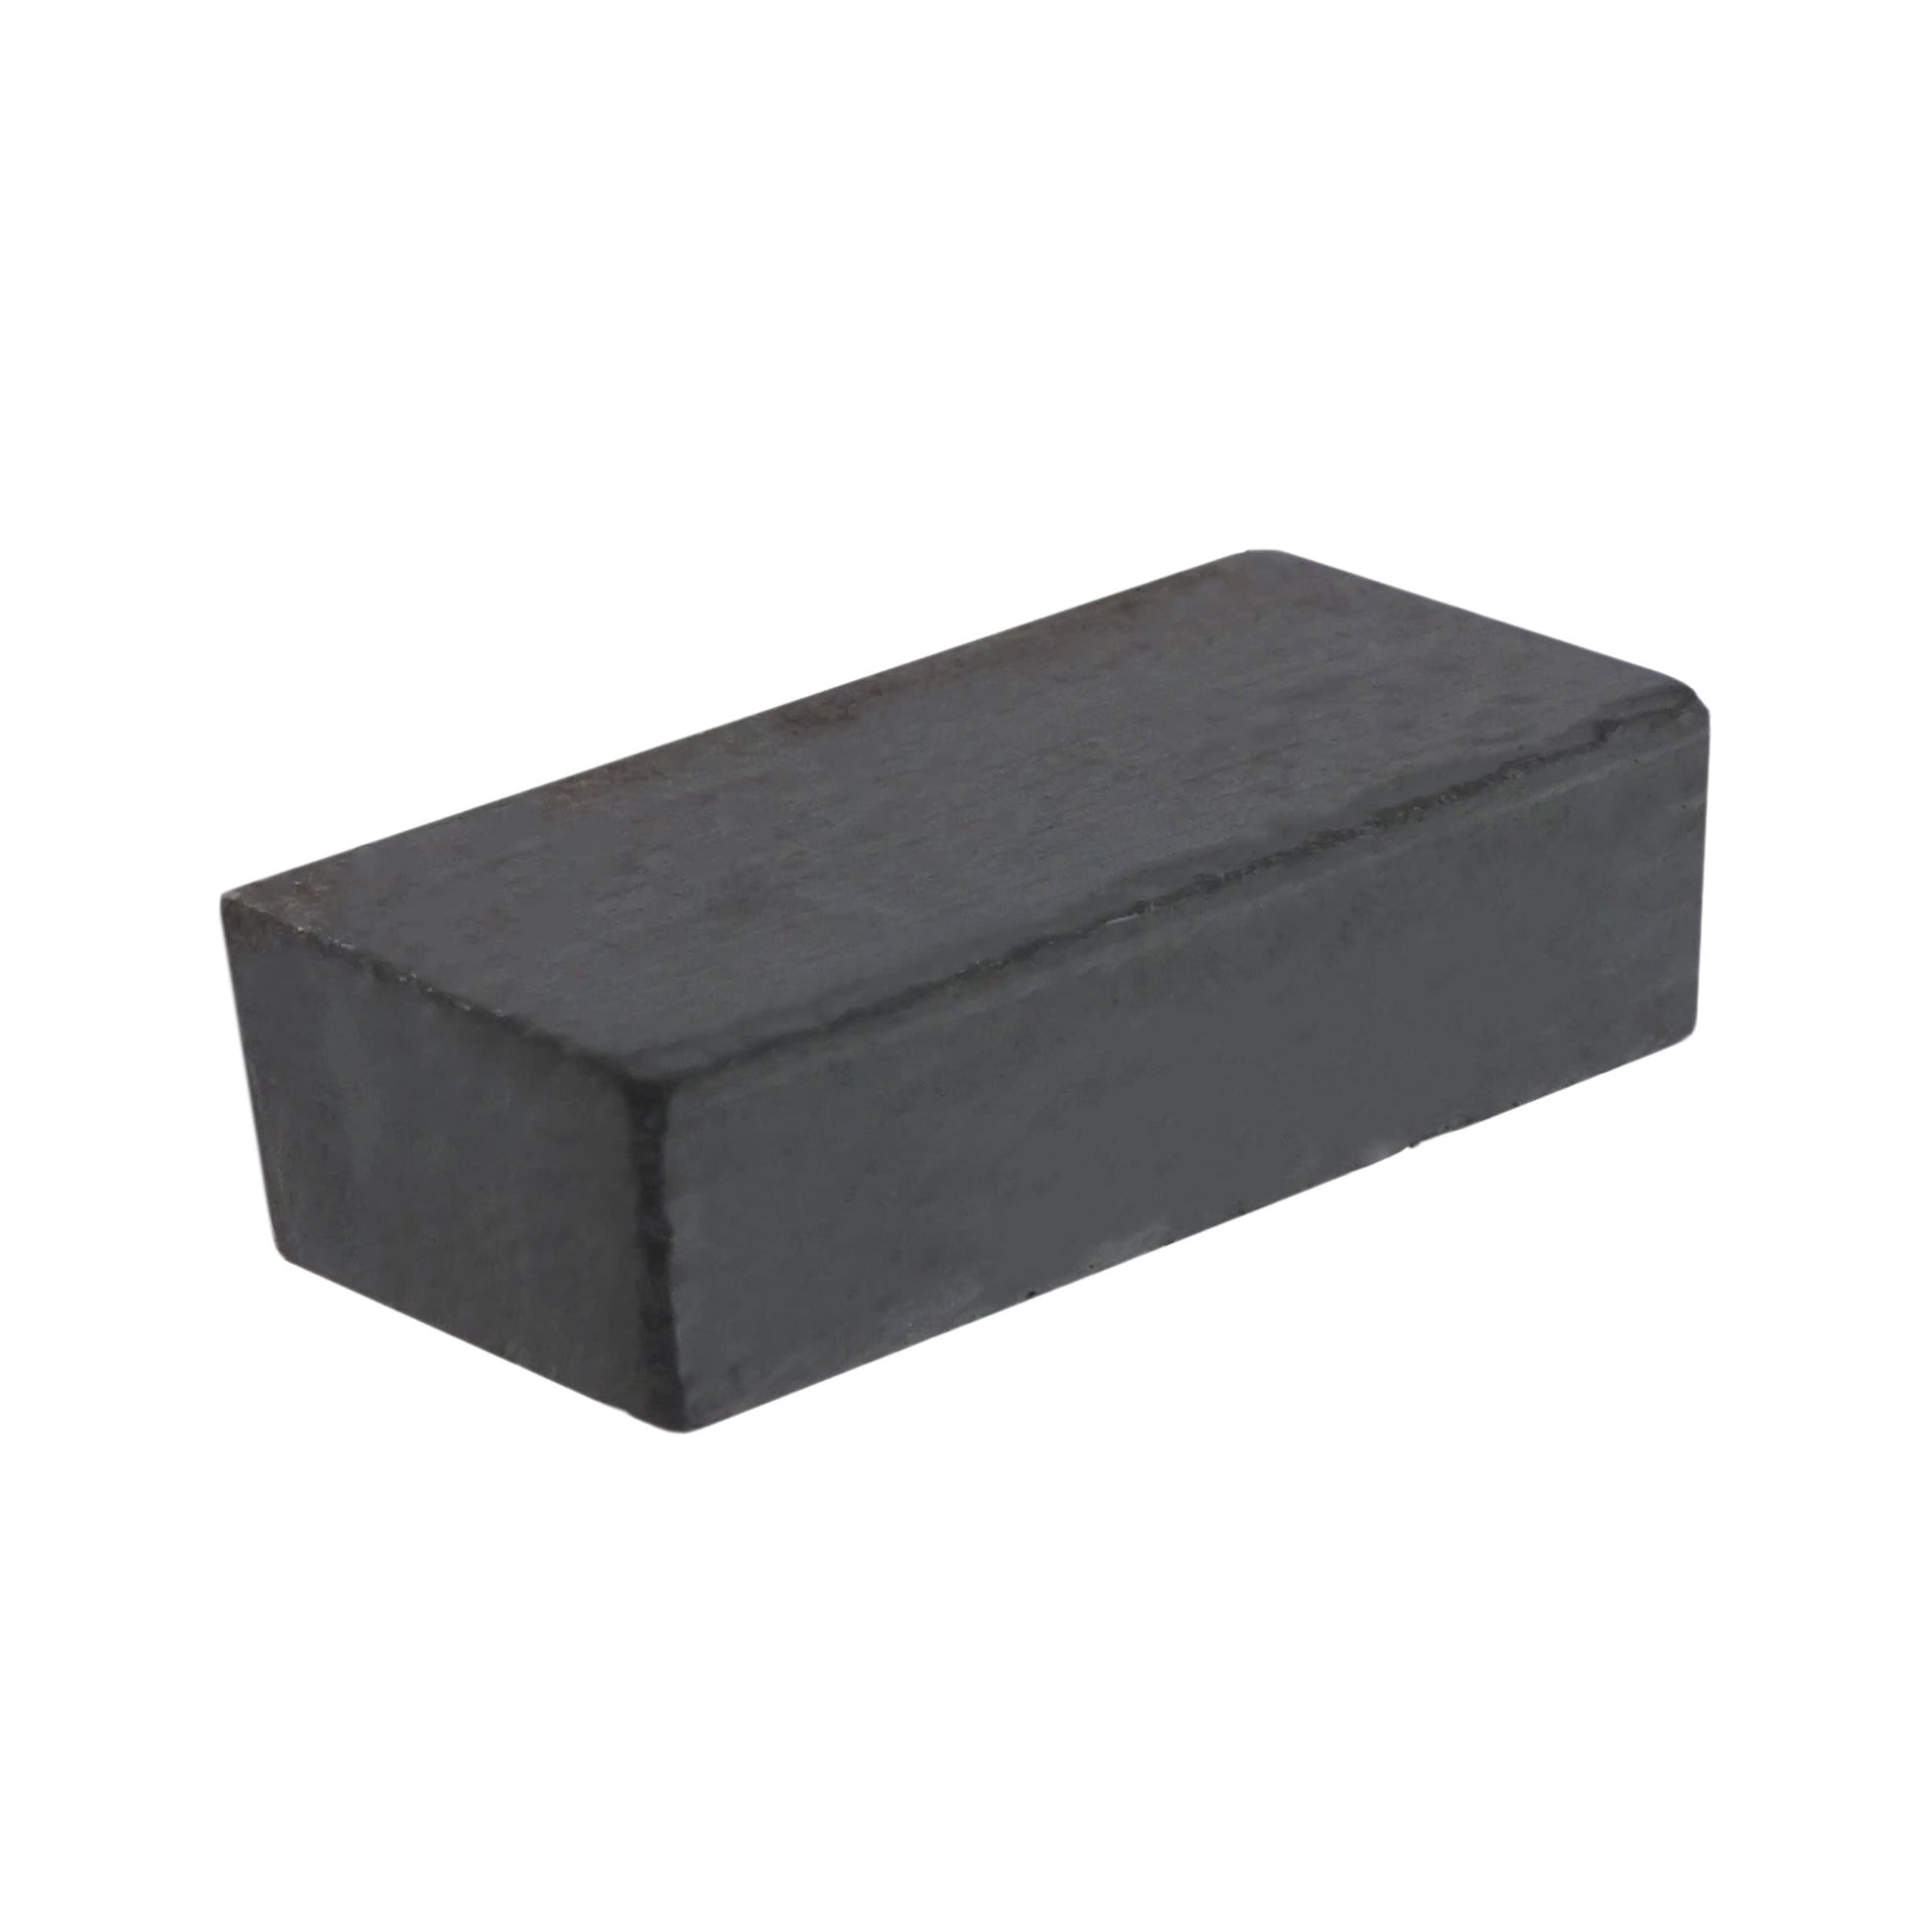 Load image into Gallery viewer, CB002001 Ceramic Block Magnet - 45 Degree Angle View